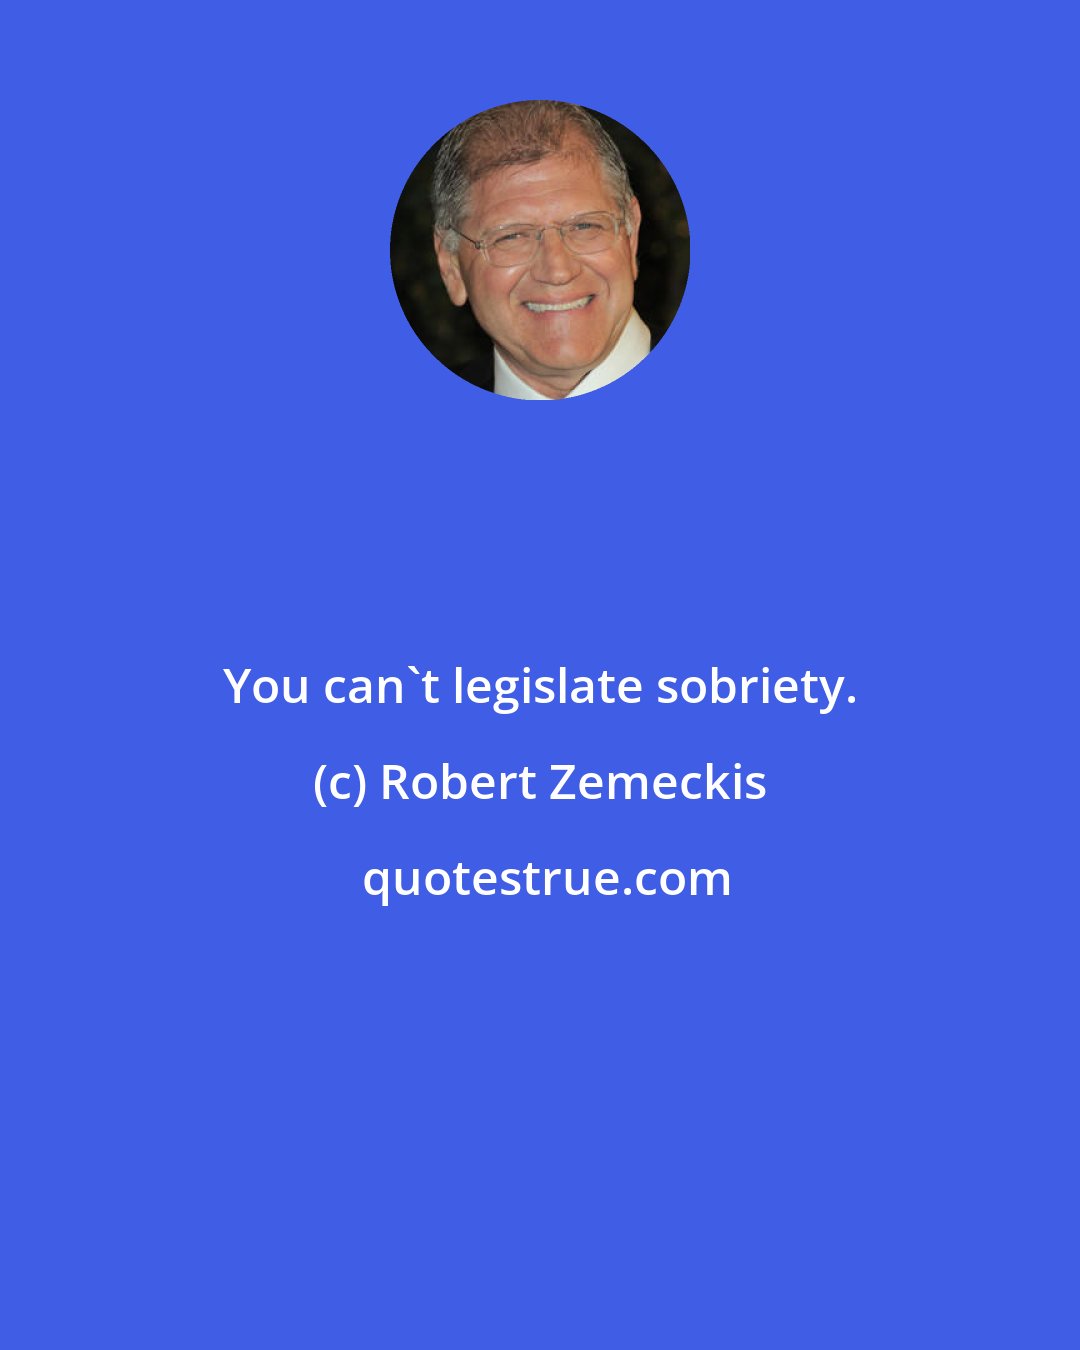 Robert Zemeckis: You can't legislate sobriety.